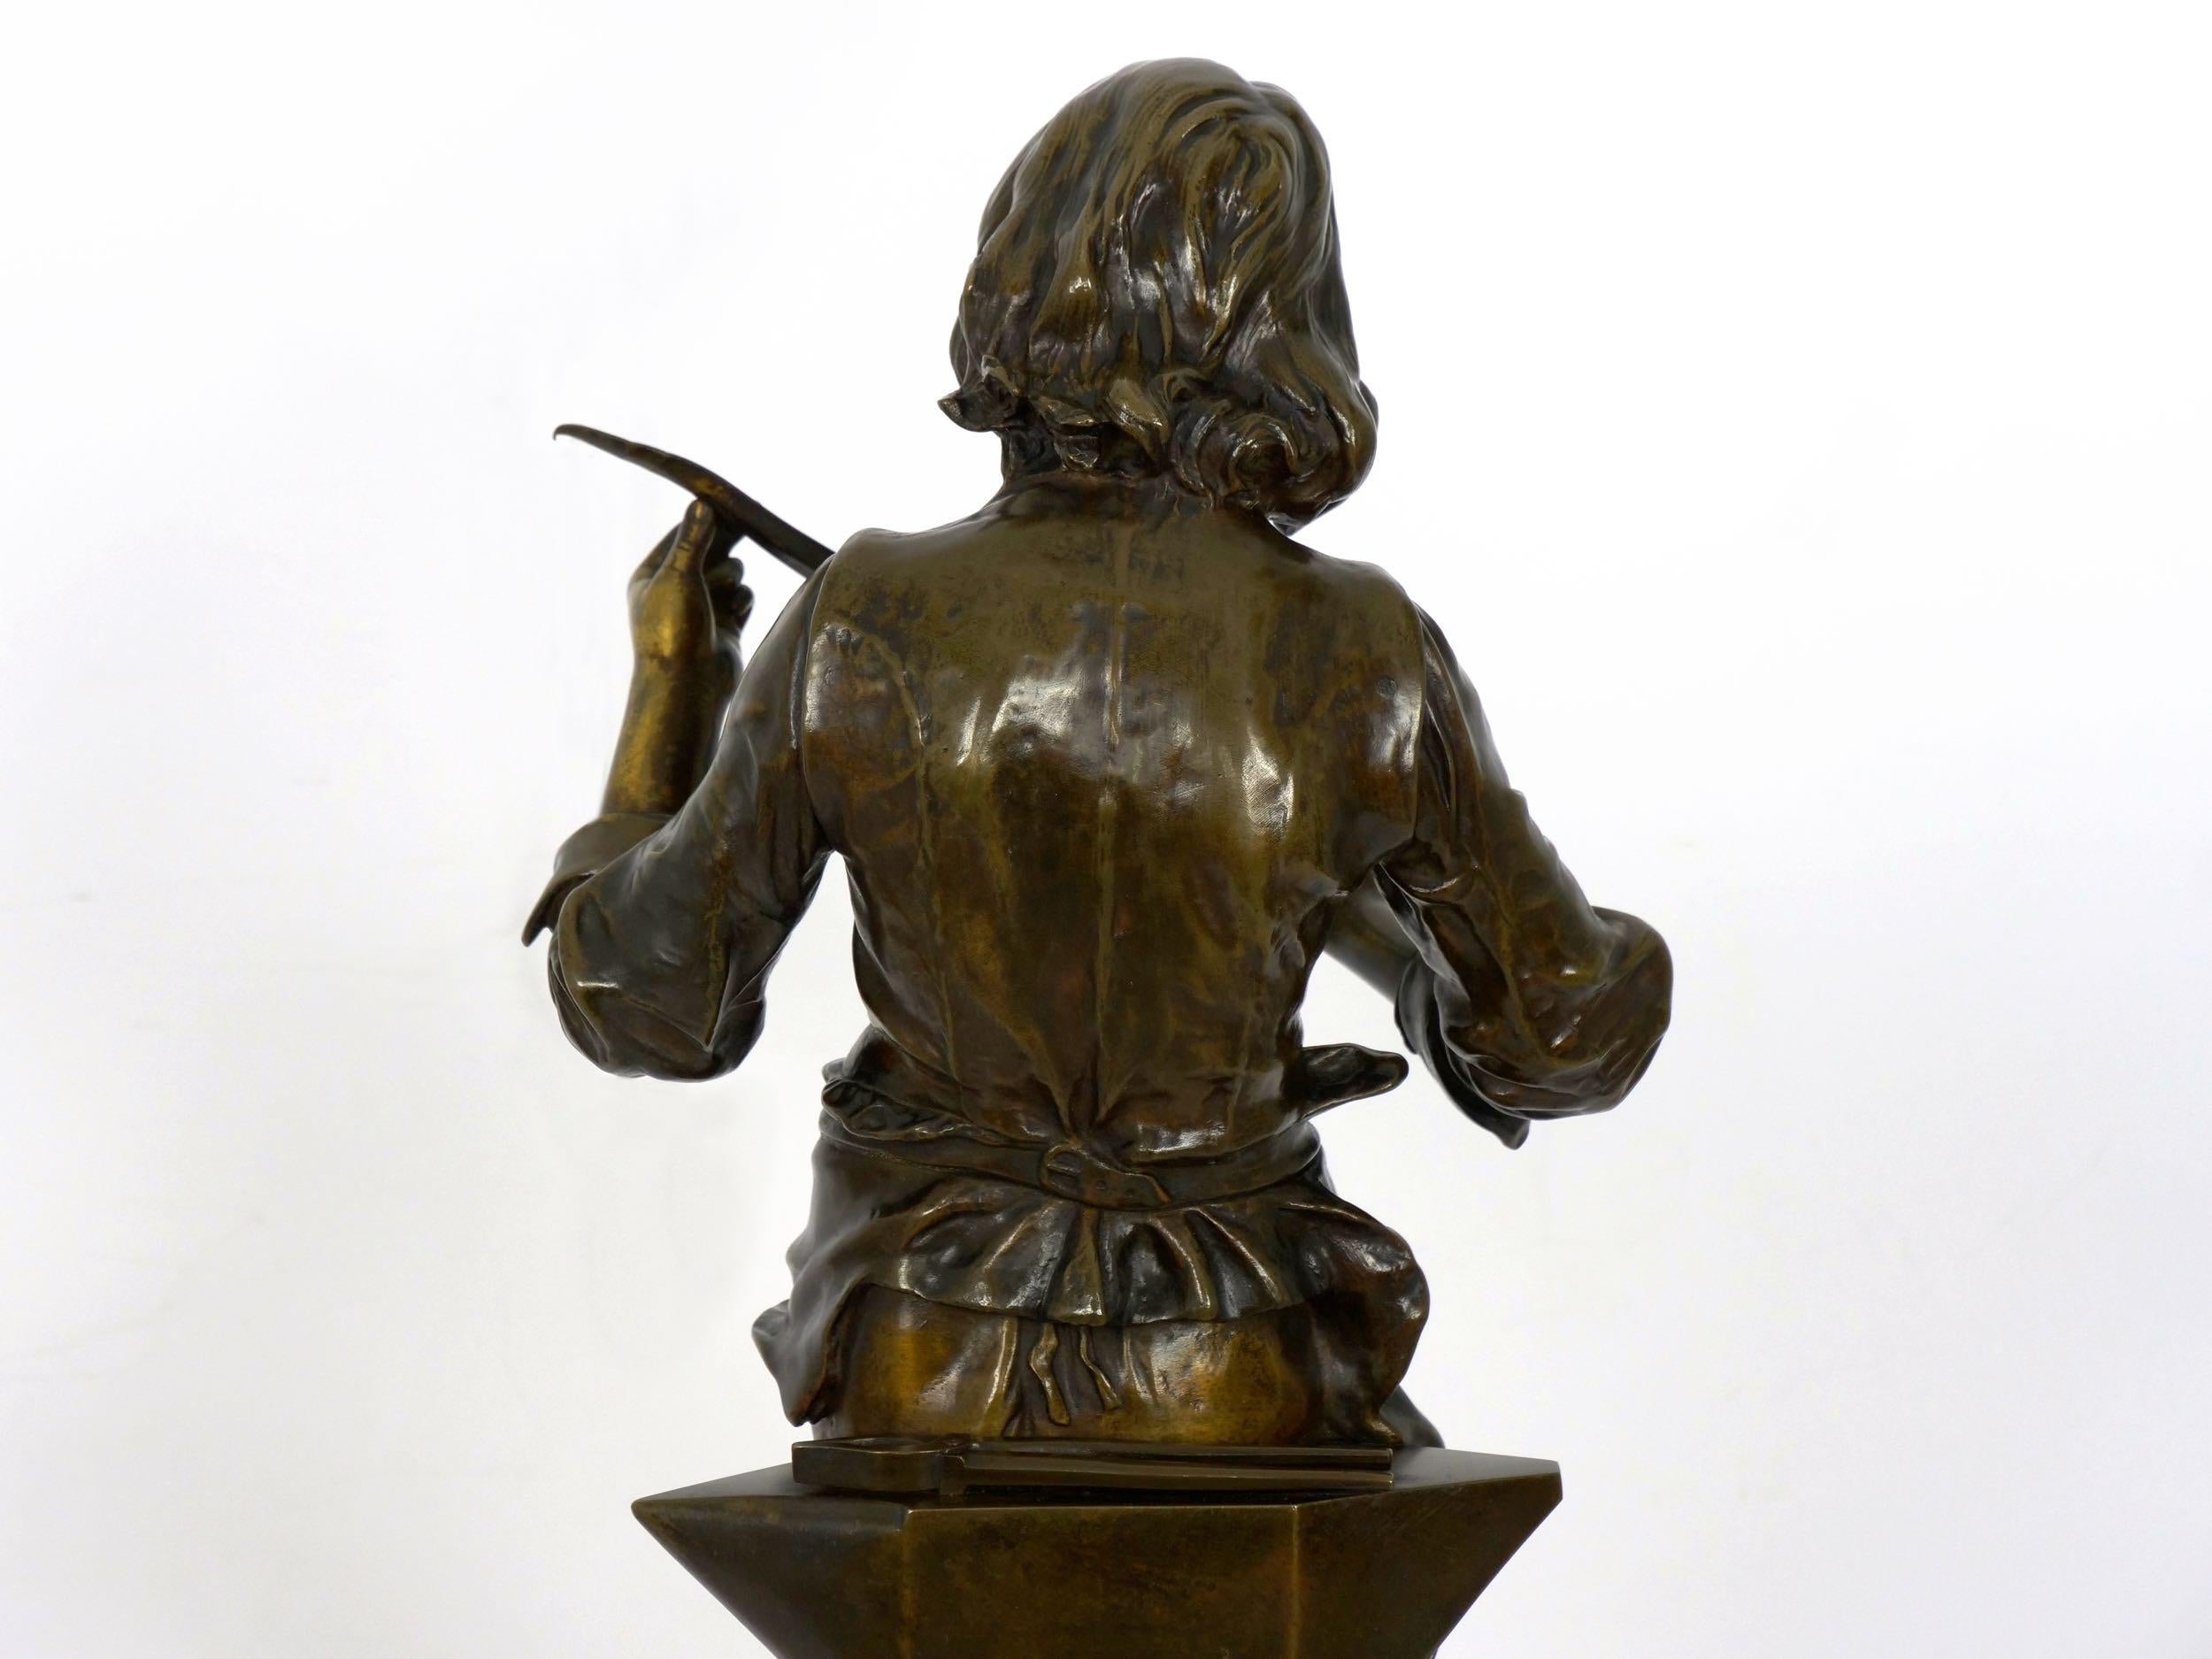 “A Young Bladesmith” French Antique Bronze Sculpture by Adrien-Étienne Gaudez 11